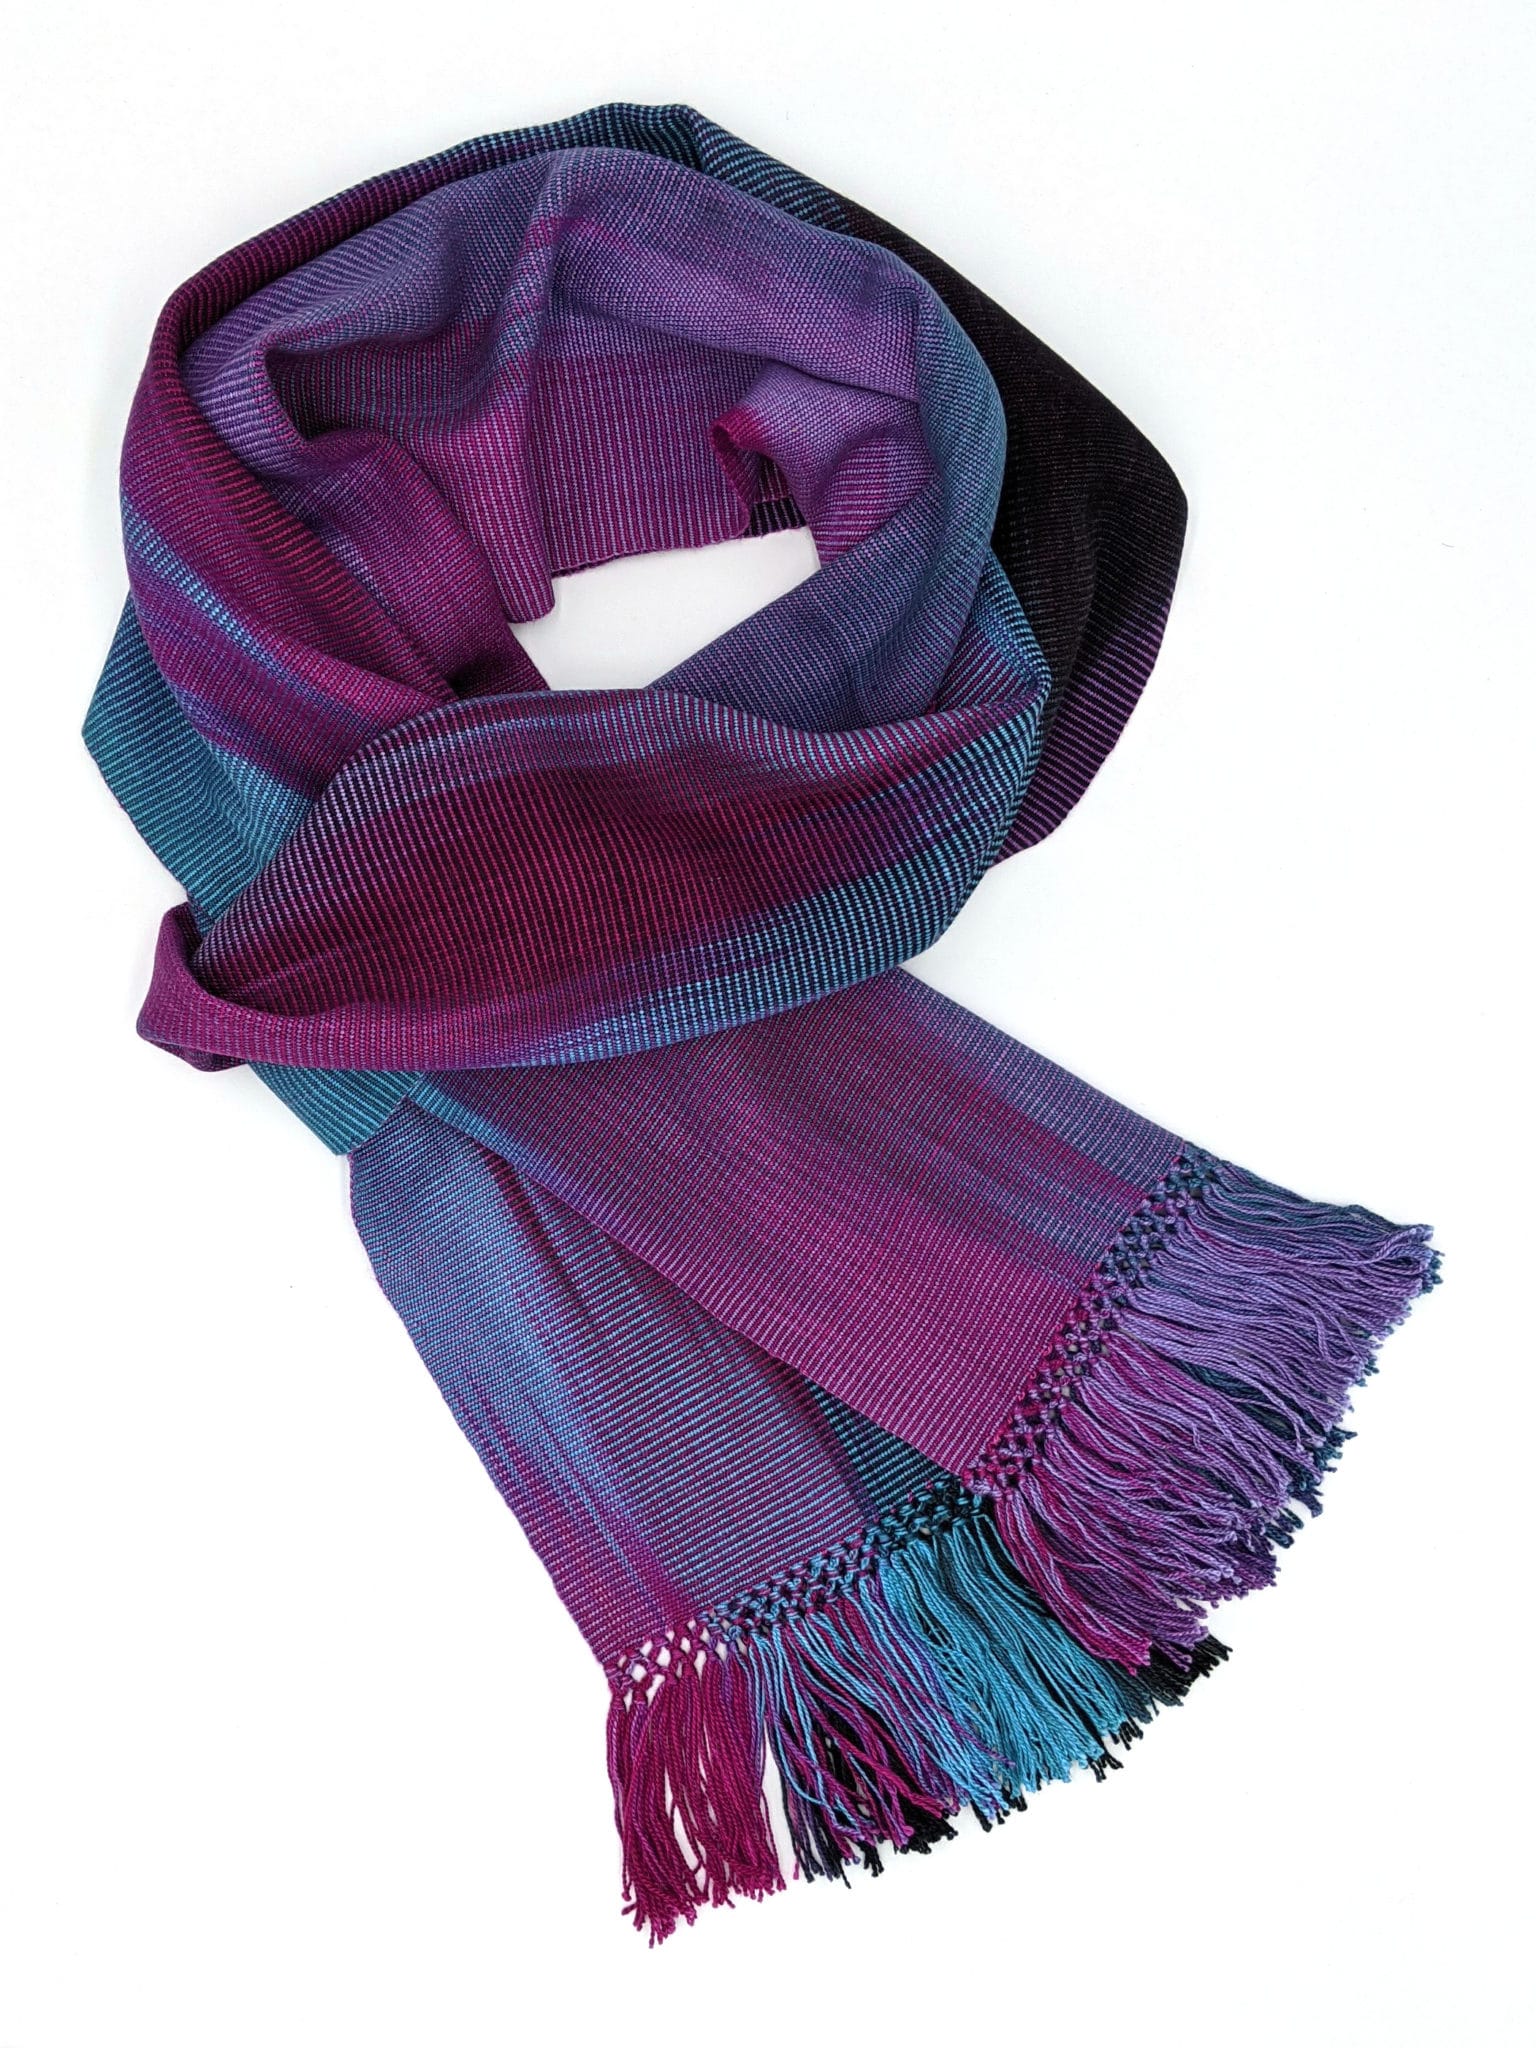 Magenta, Blue and Black Lightweight Bamboo Handwoven Scarf 8 x 68